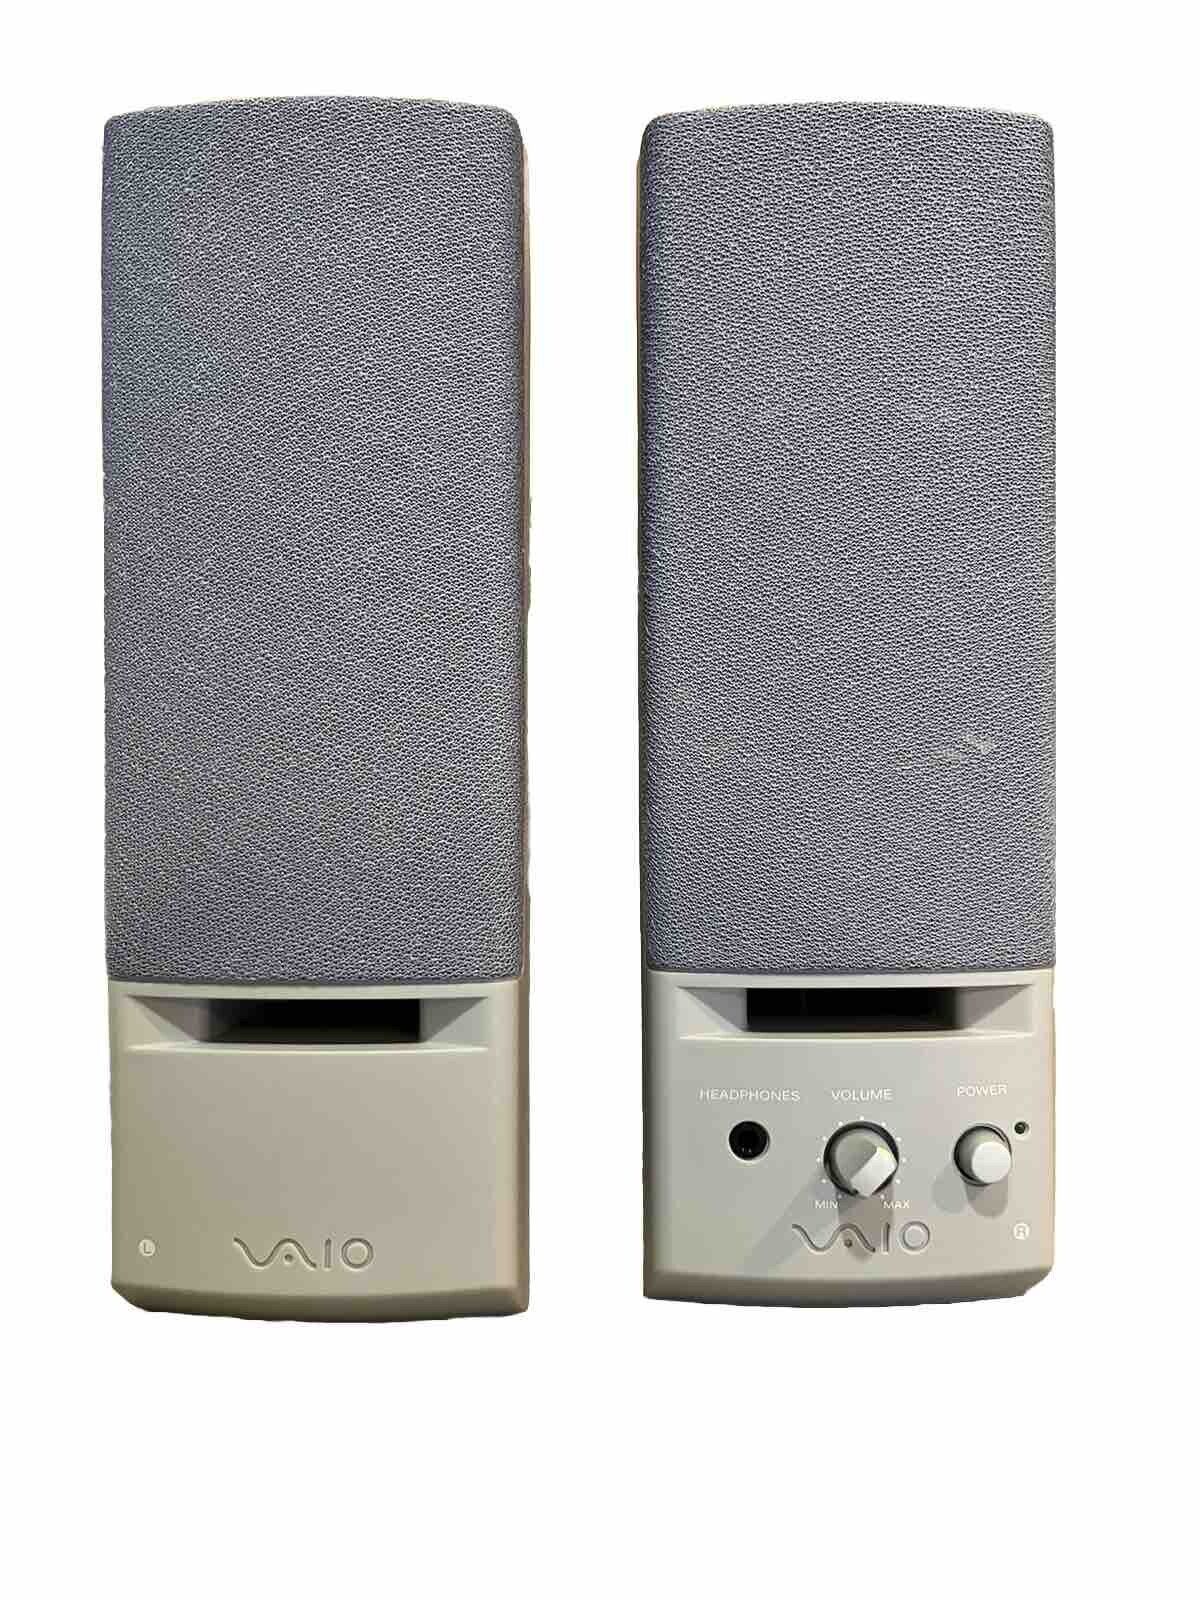 New SONY VAIO DESKTOP SPEAKERS / TESTED / WORKING / HEAR VIDEO / HIGH QUALITY